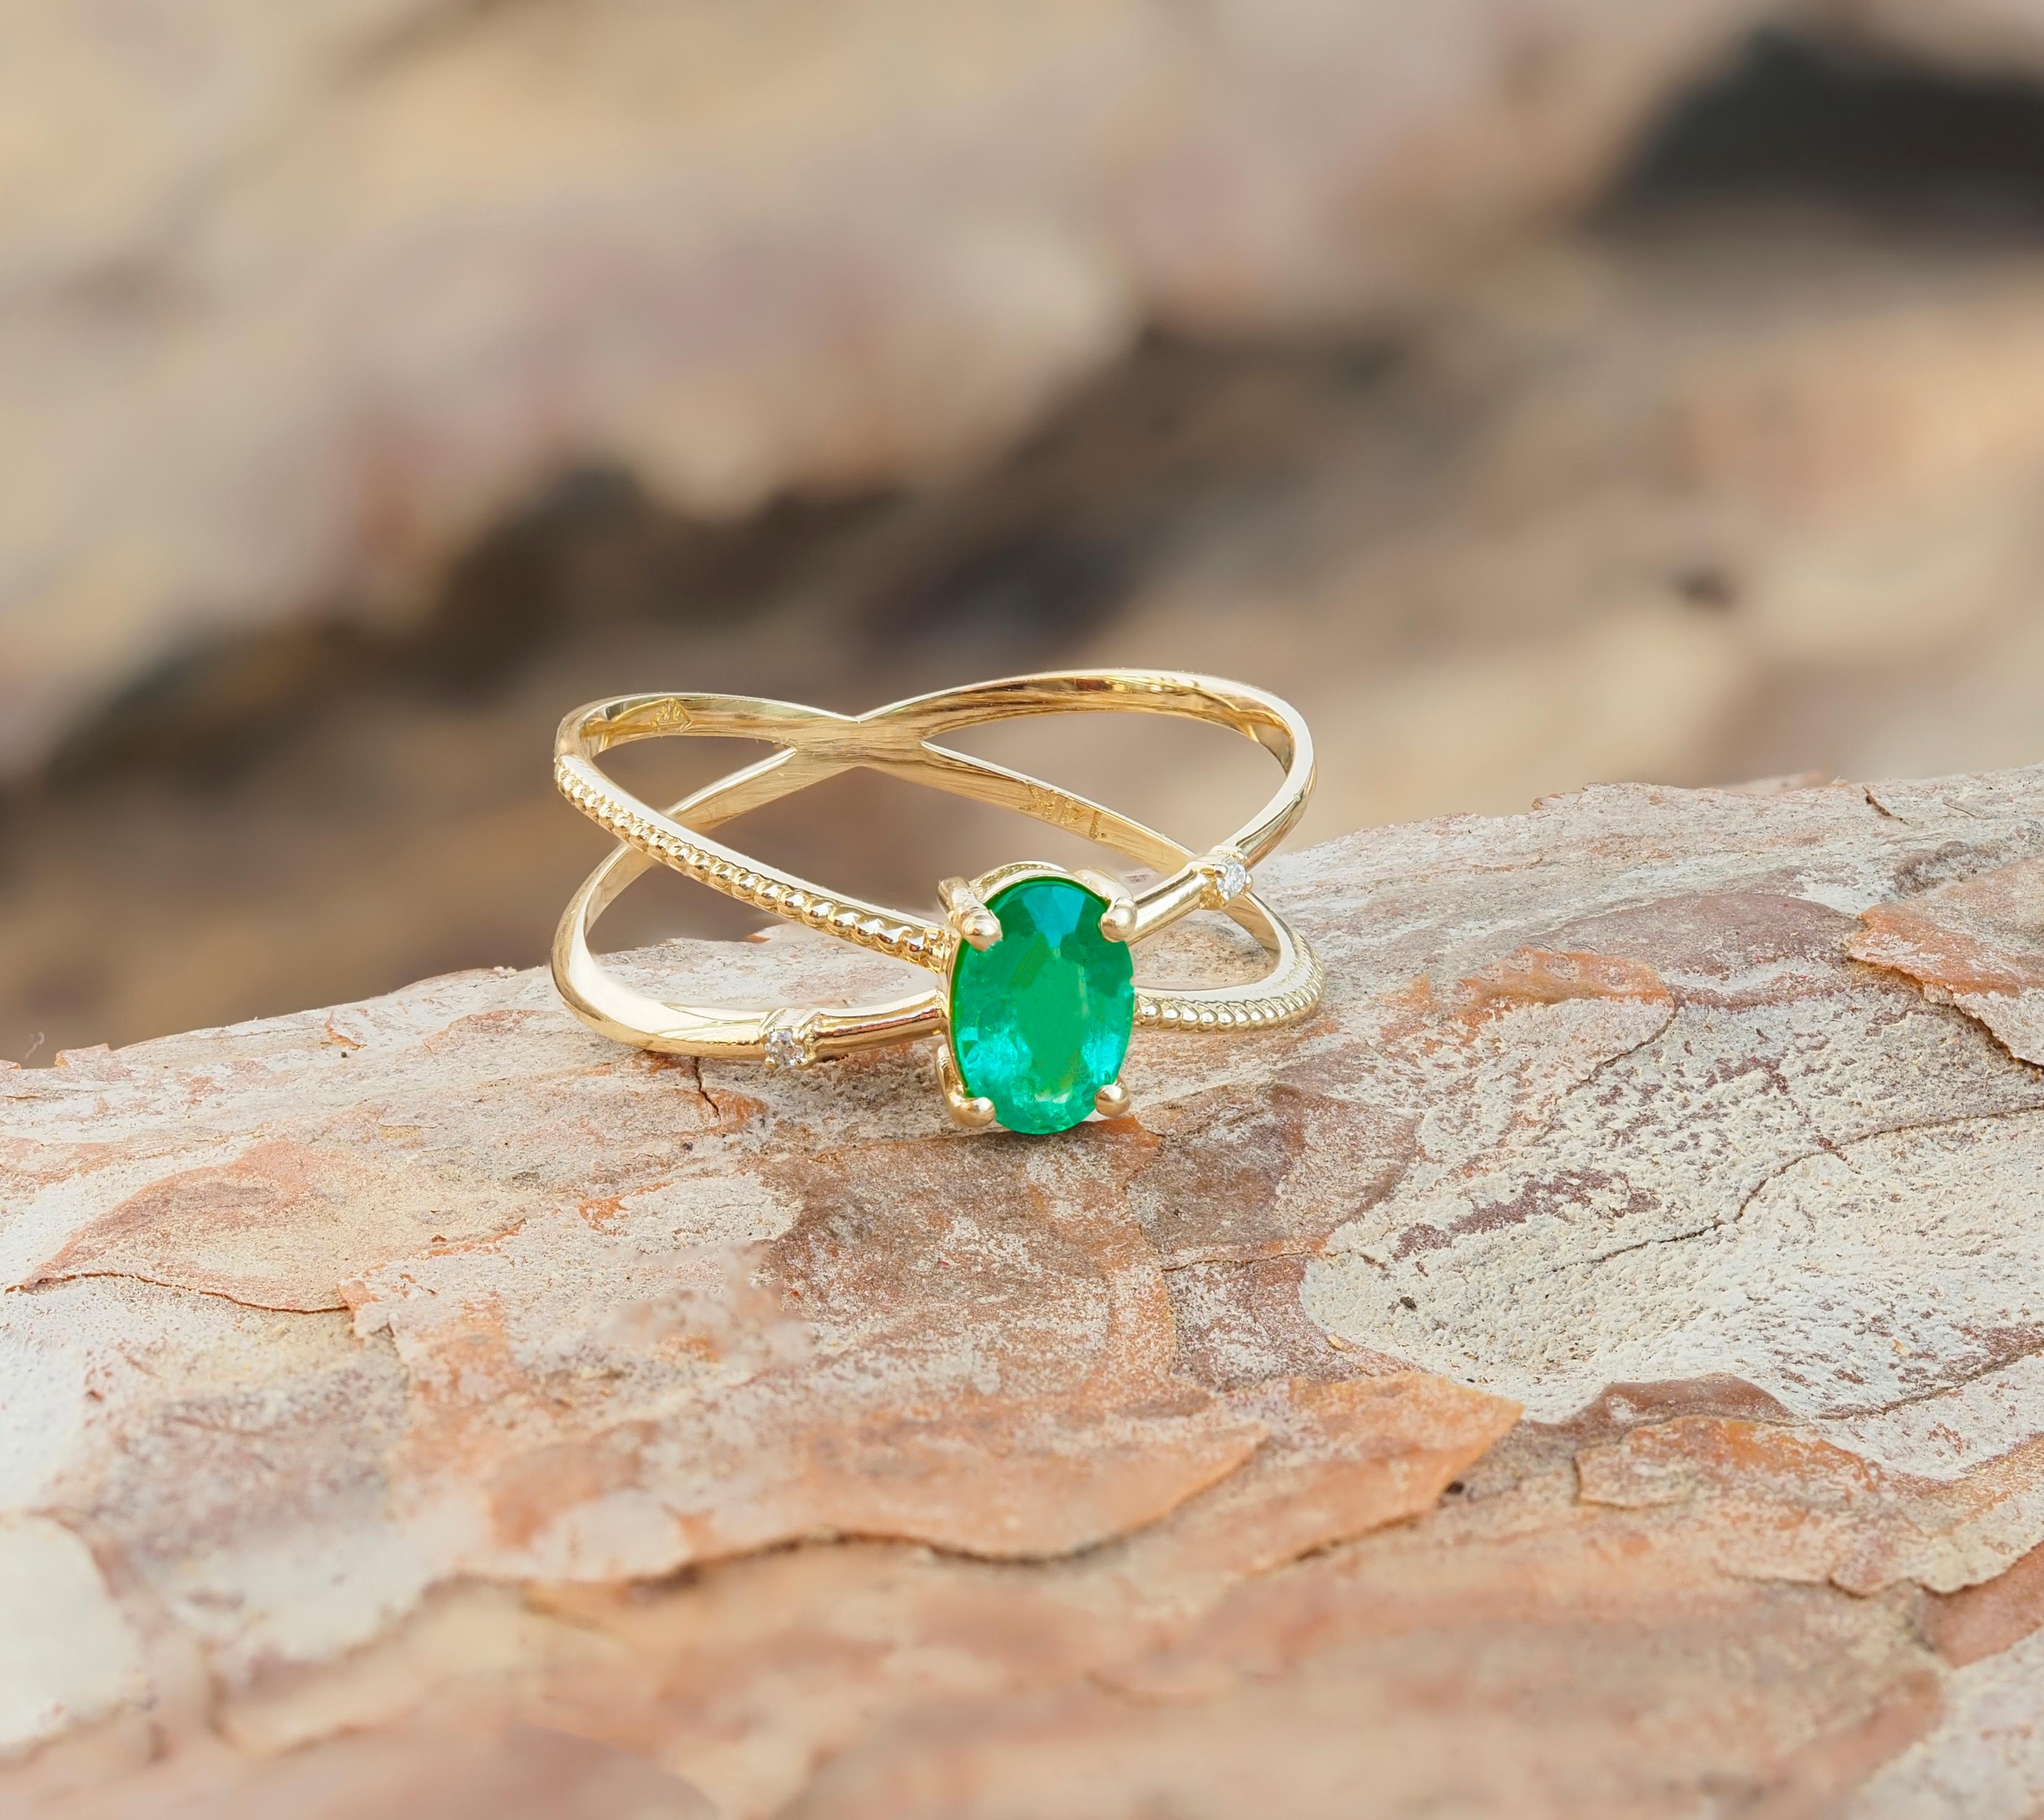 Emerald spiral ring. 
Oval emerald ring. Emerald gold ring. 14k gold ring with Emerald. Emerald engagement ring. May Birthstone Ring.

Metal: 14k gold
Total weight: 1.9 g  depends from size.

Main Stone: emerald
Shape: Oval
Total Carat Weight: aprox